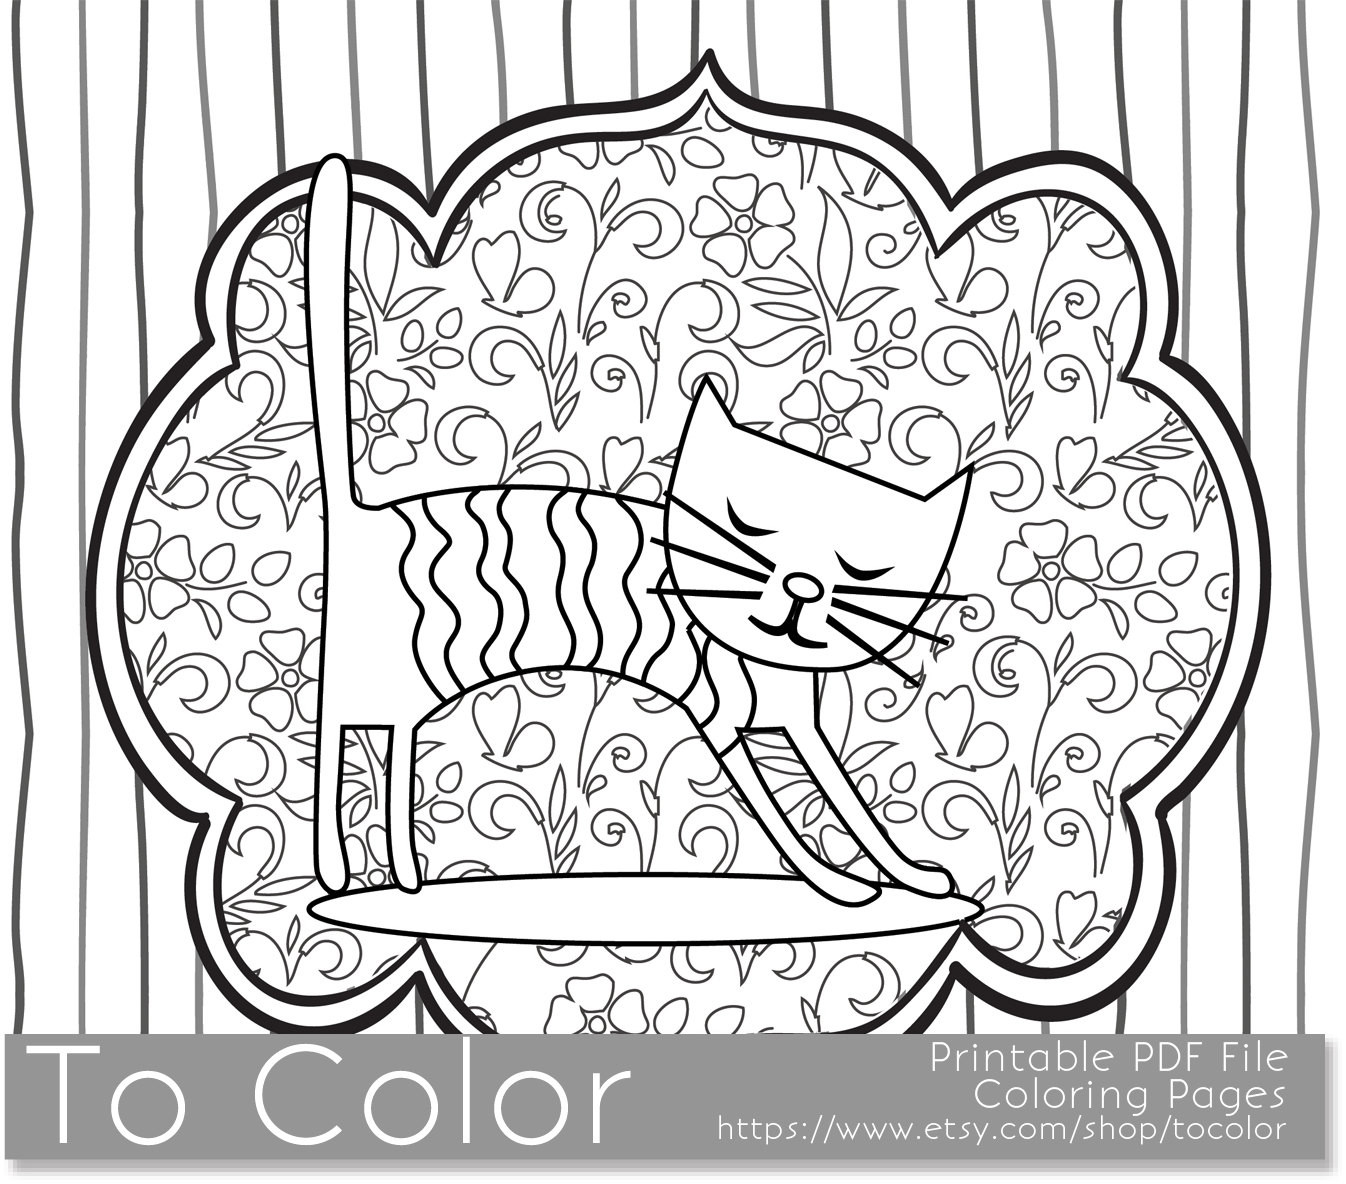 Cats Adult Coloring Book
 Printable Whimsical Cat Coloring Page for Adults PDF by